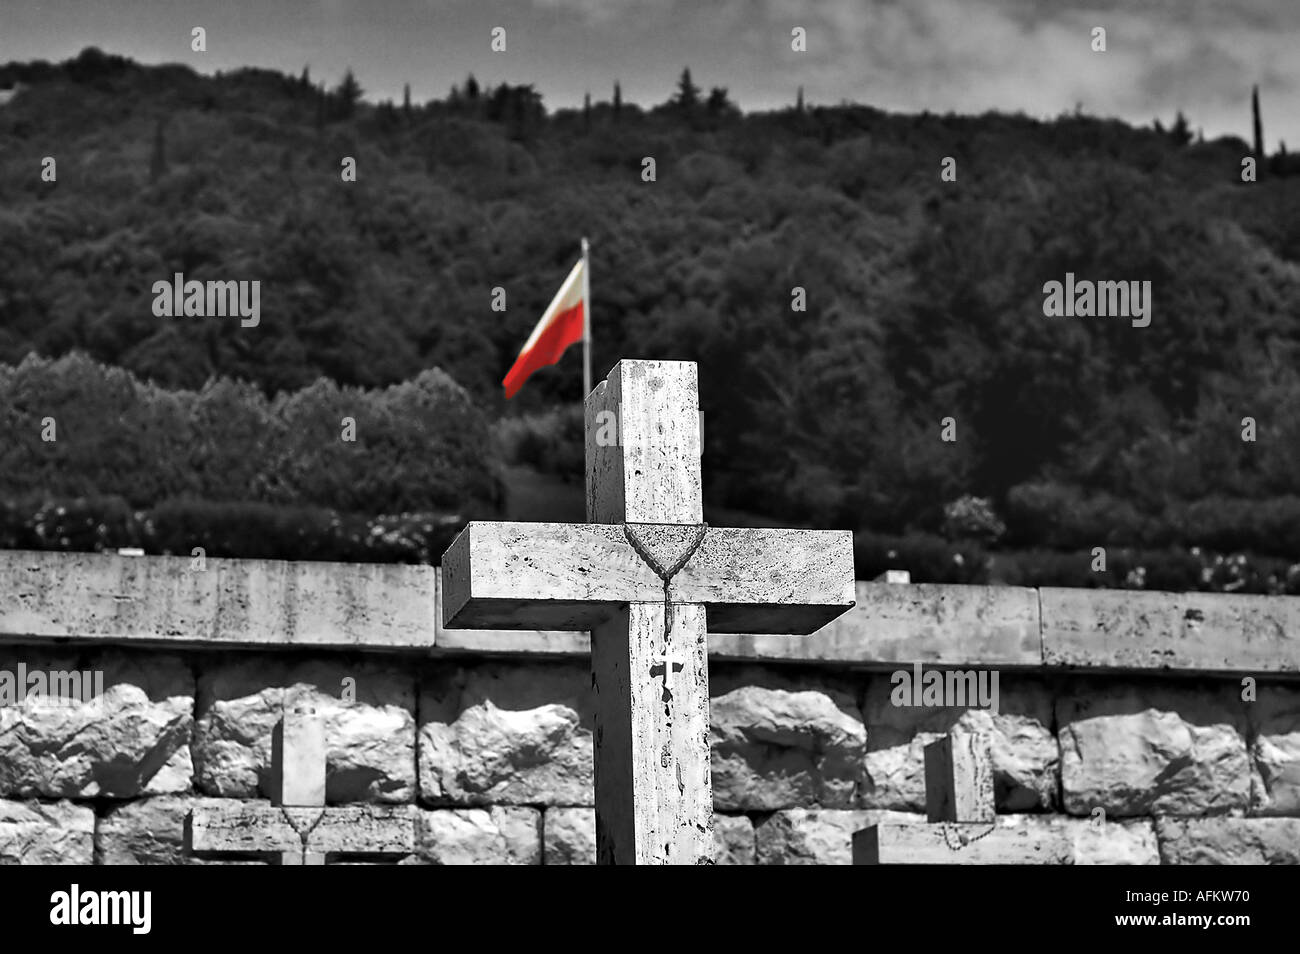 The Polish war cemetery at Monte Cassino Abbazia Italy. Place of a vicious world war 2 battle between the Allies and Nazis. Stock Photo